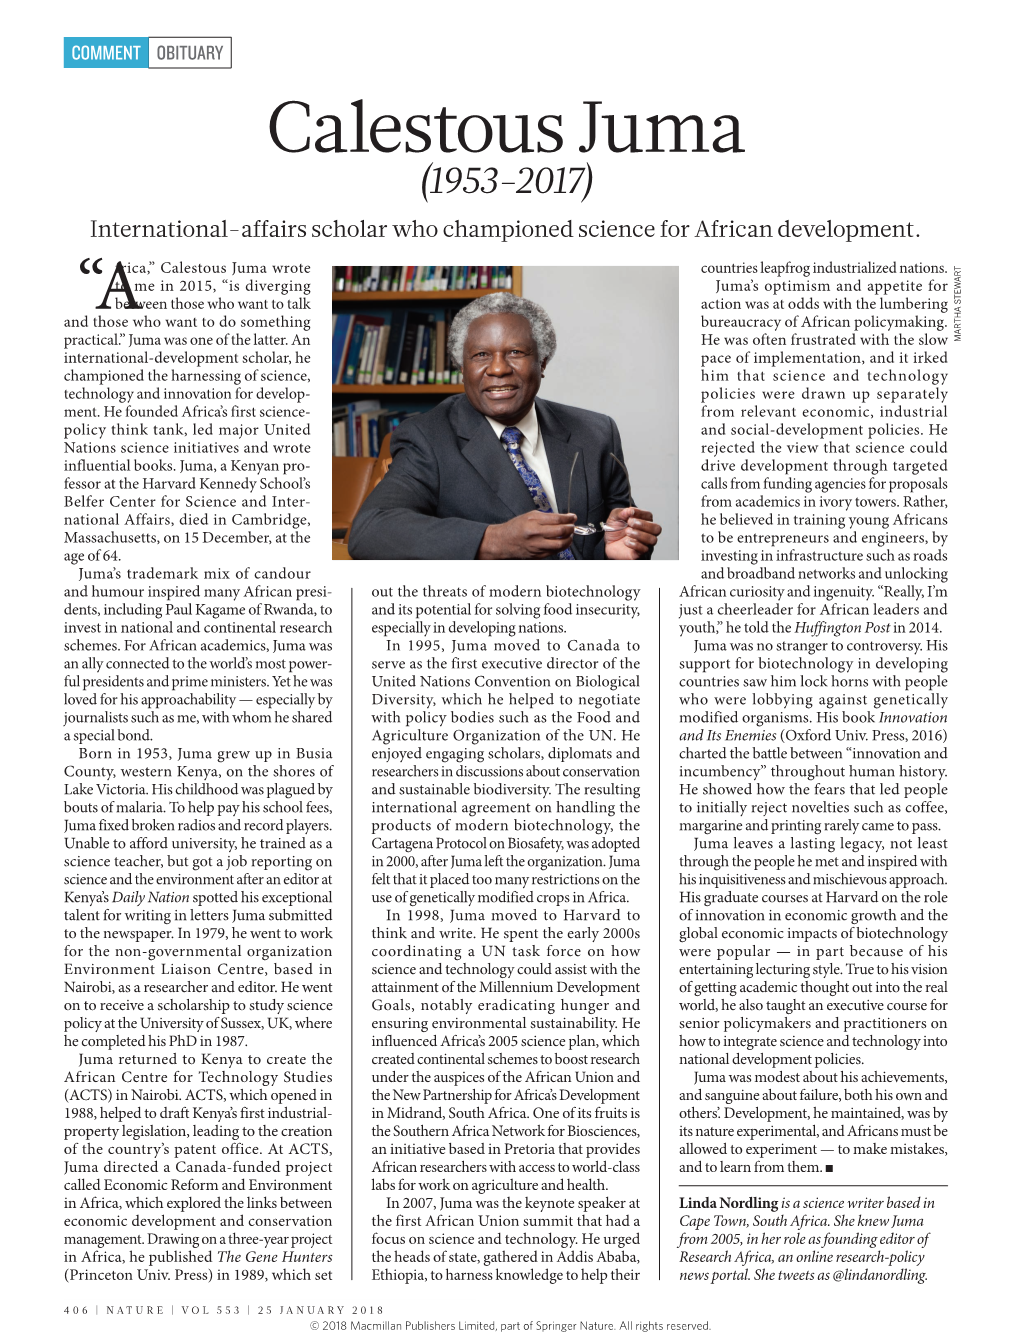 Calestous Juma (1953-2017) International-Affairs Scholar Who Championed Science for African Development